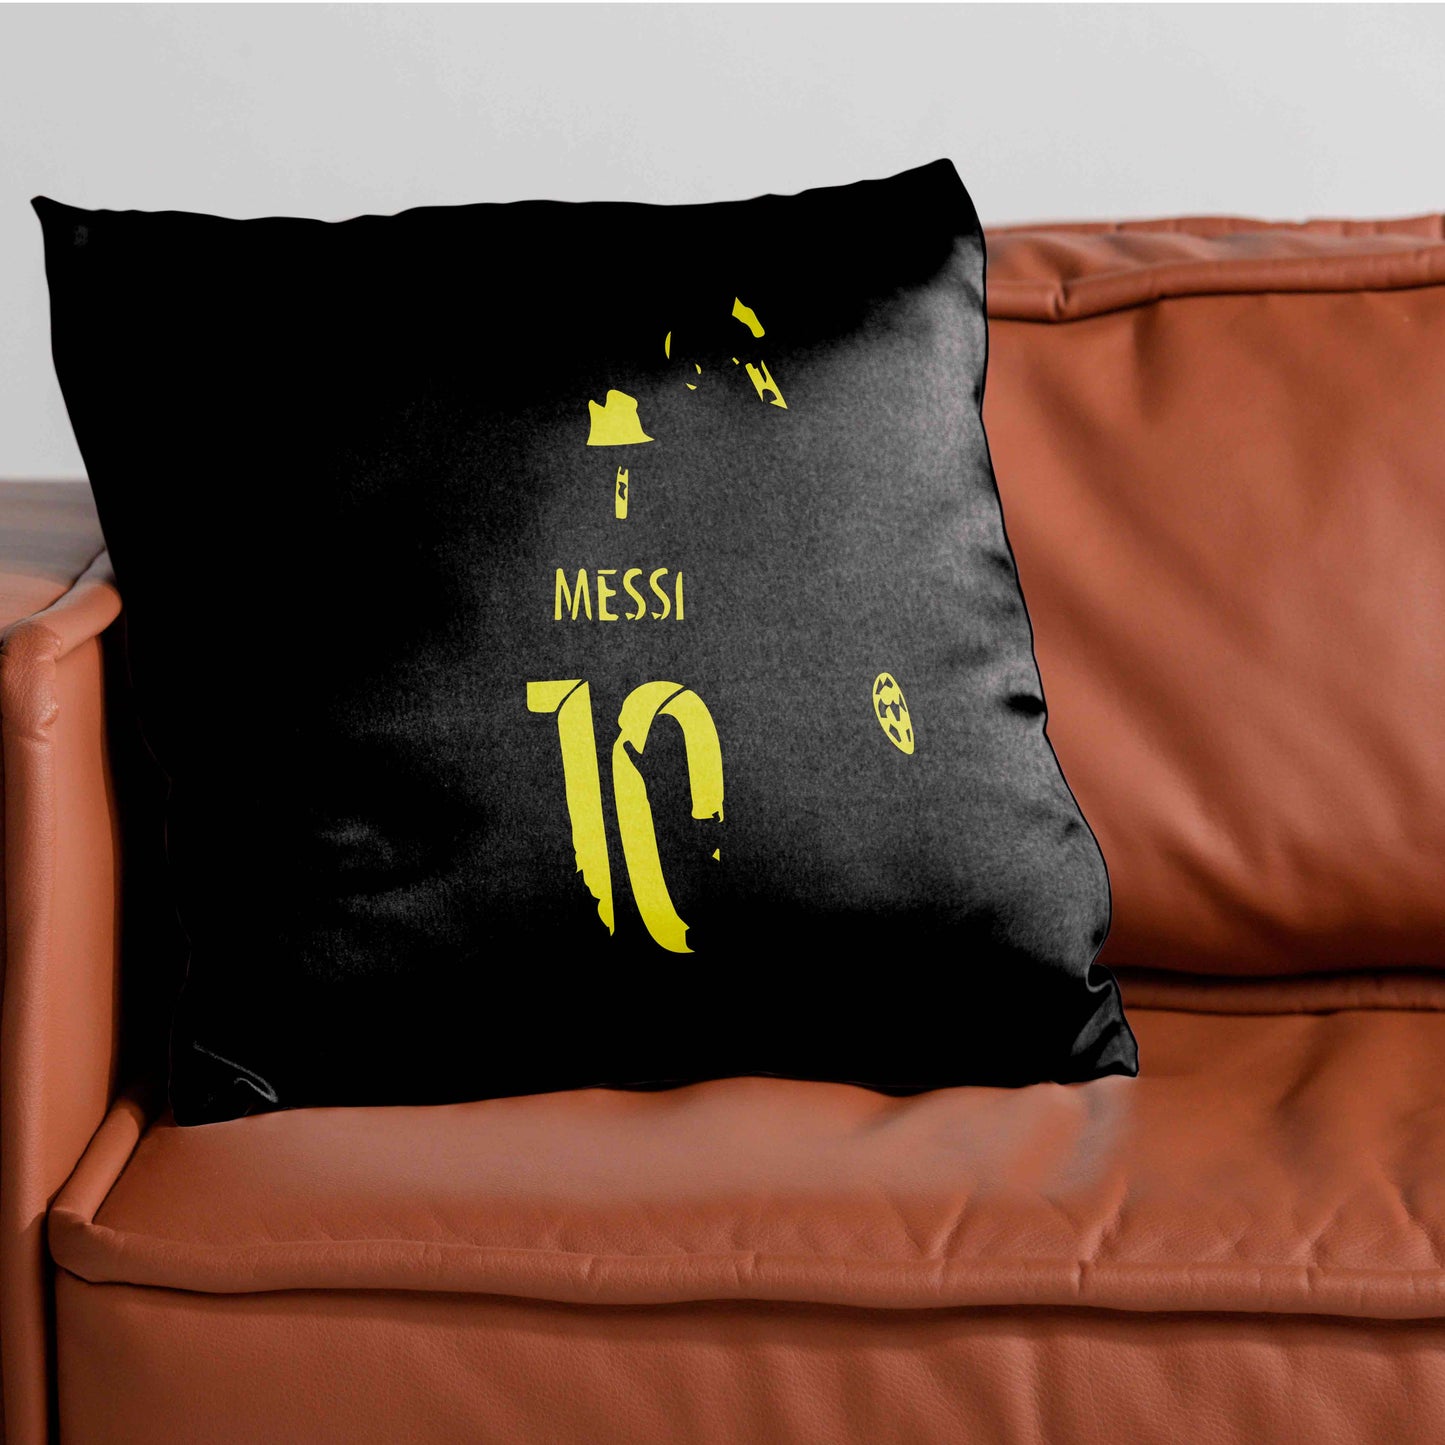 Messi Golden Goal Cushion Cover Trendy Home